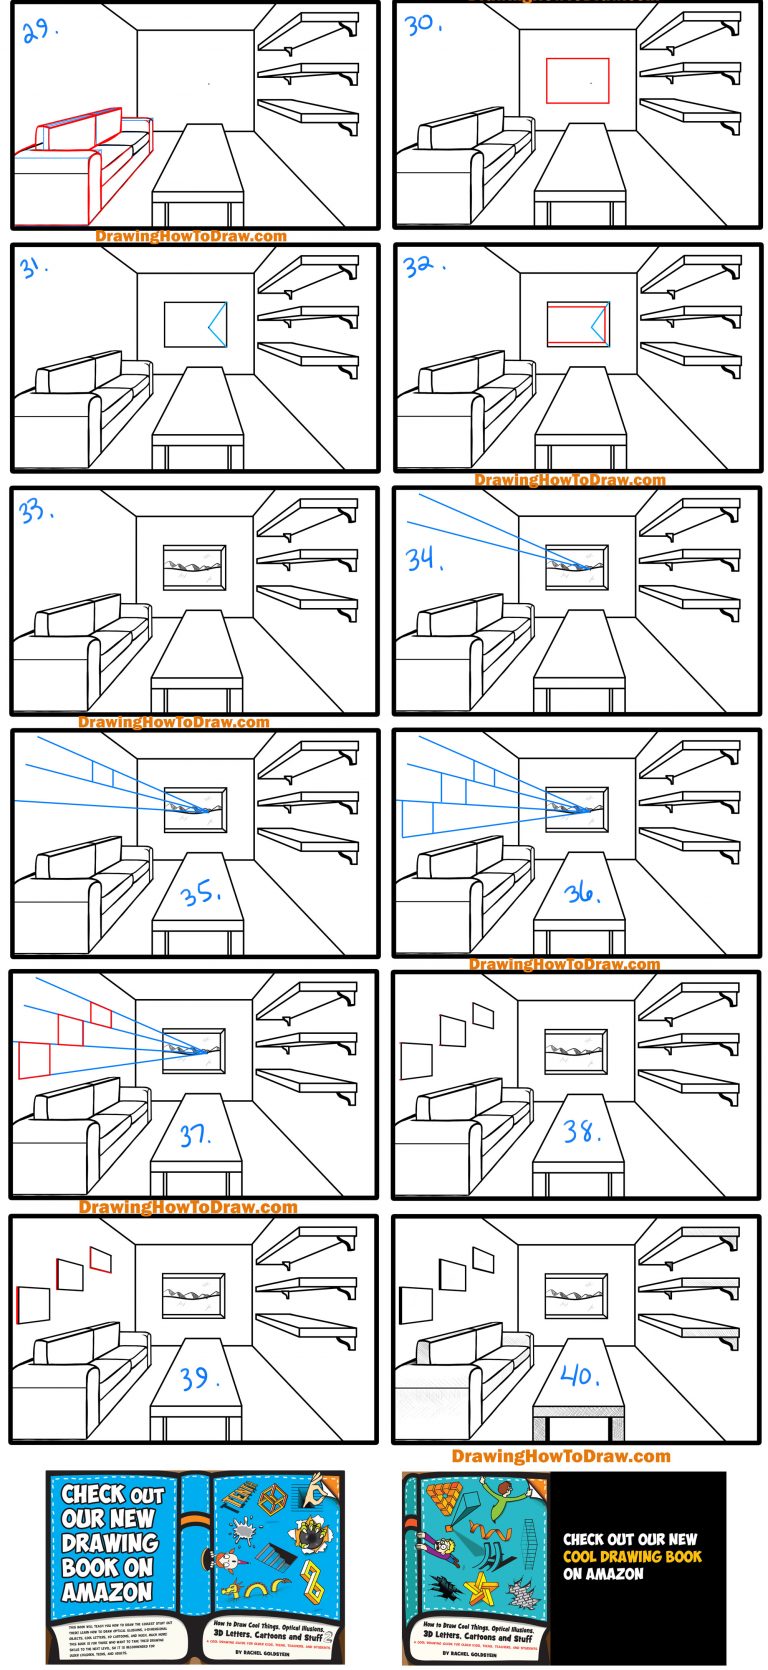 How to Draw a Room in 1 Point Perspective Easy Step by Step Drawing